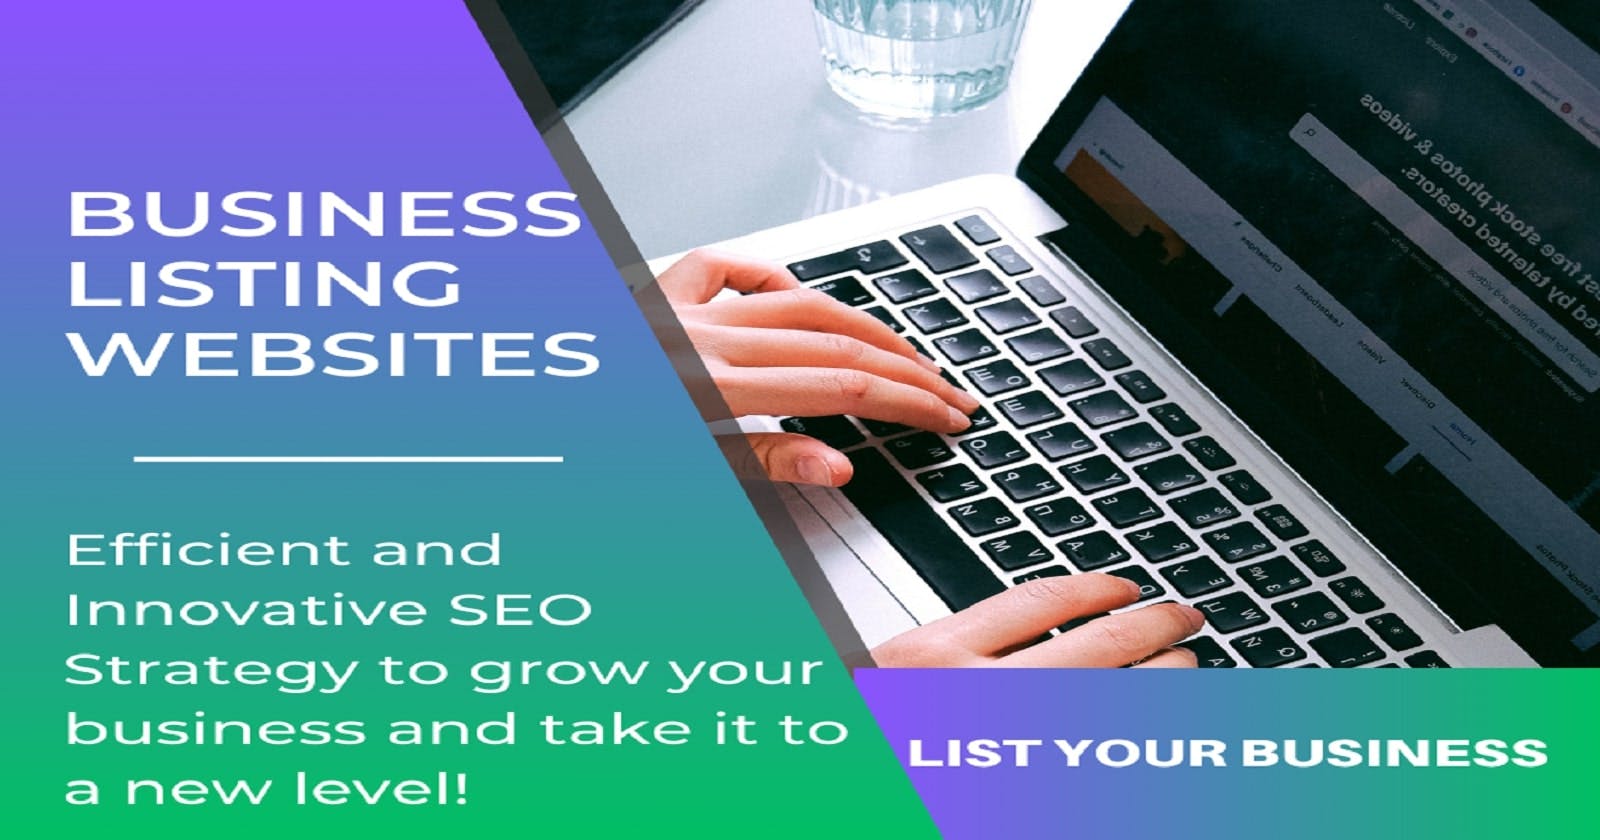 Business Listing Websites: Boost Your Online Visibility